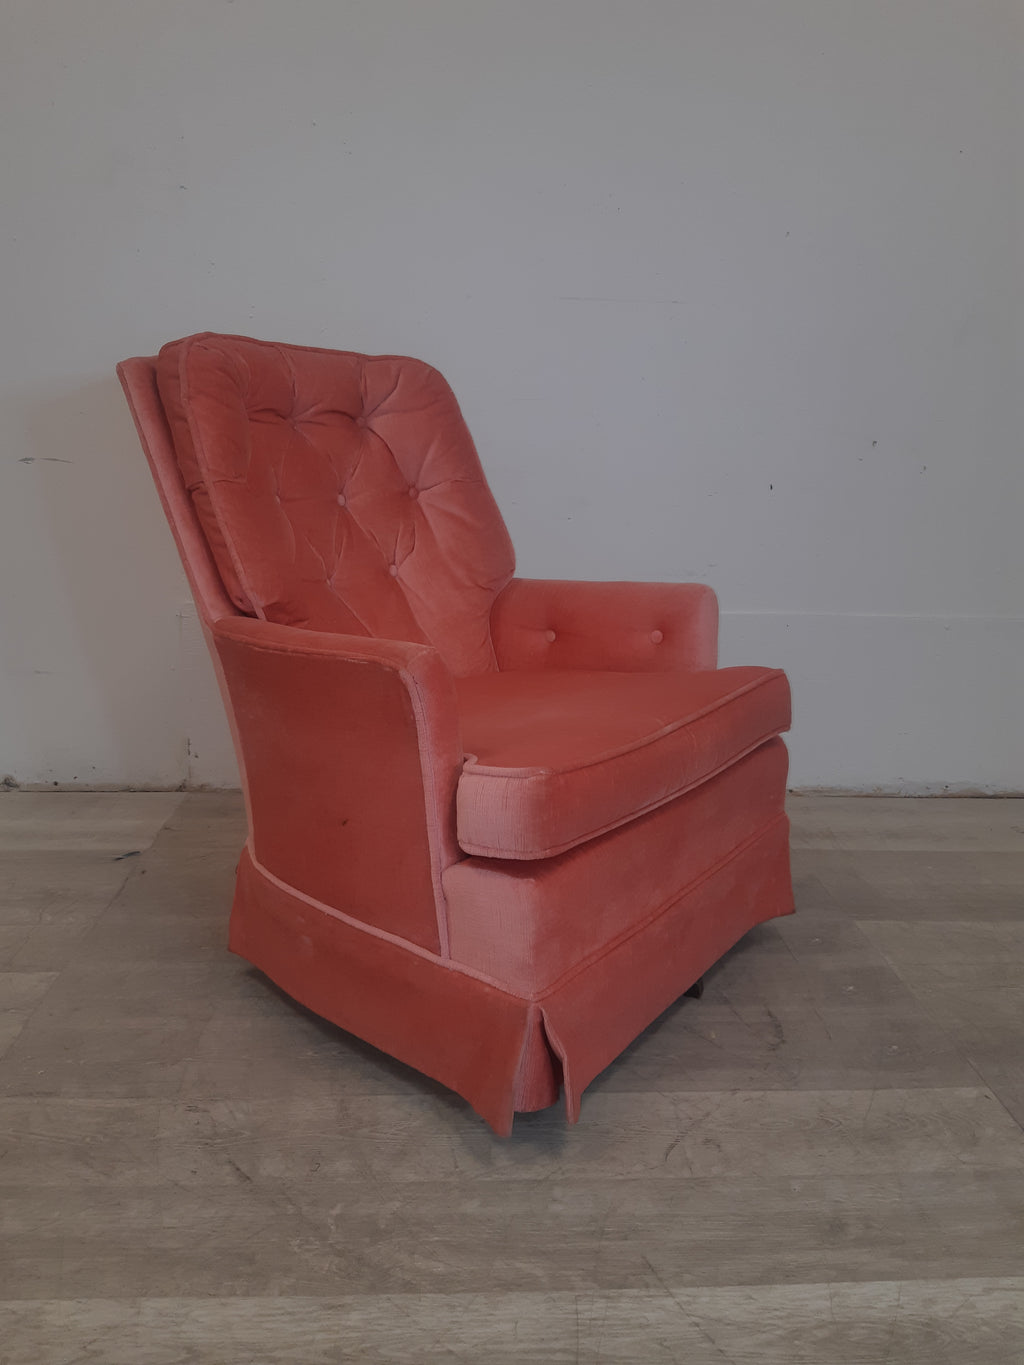 29" Hot Pink Arm Chair